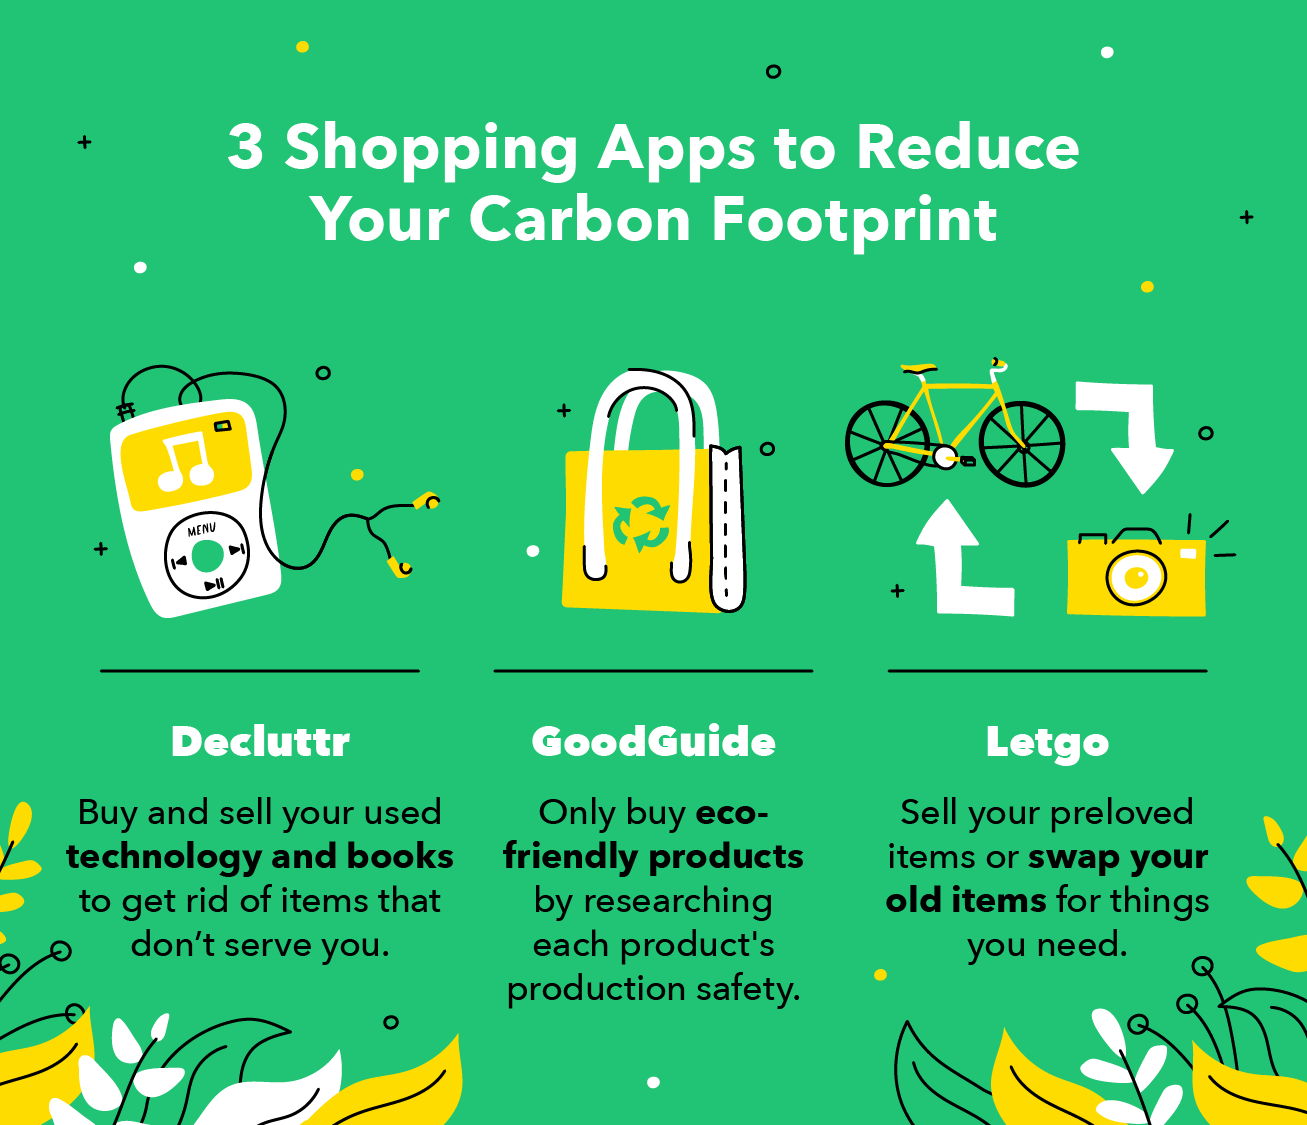 3 Shopping Apps to Reduce Your Carbon Footprint